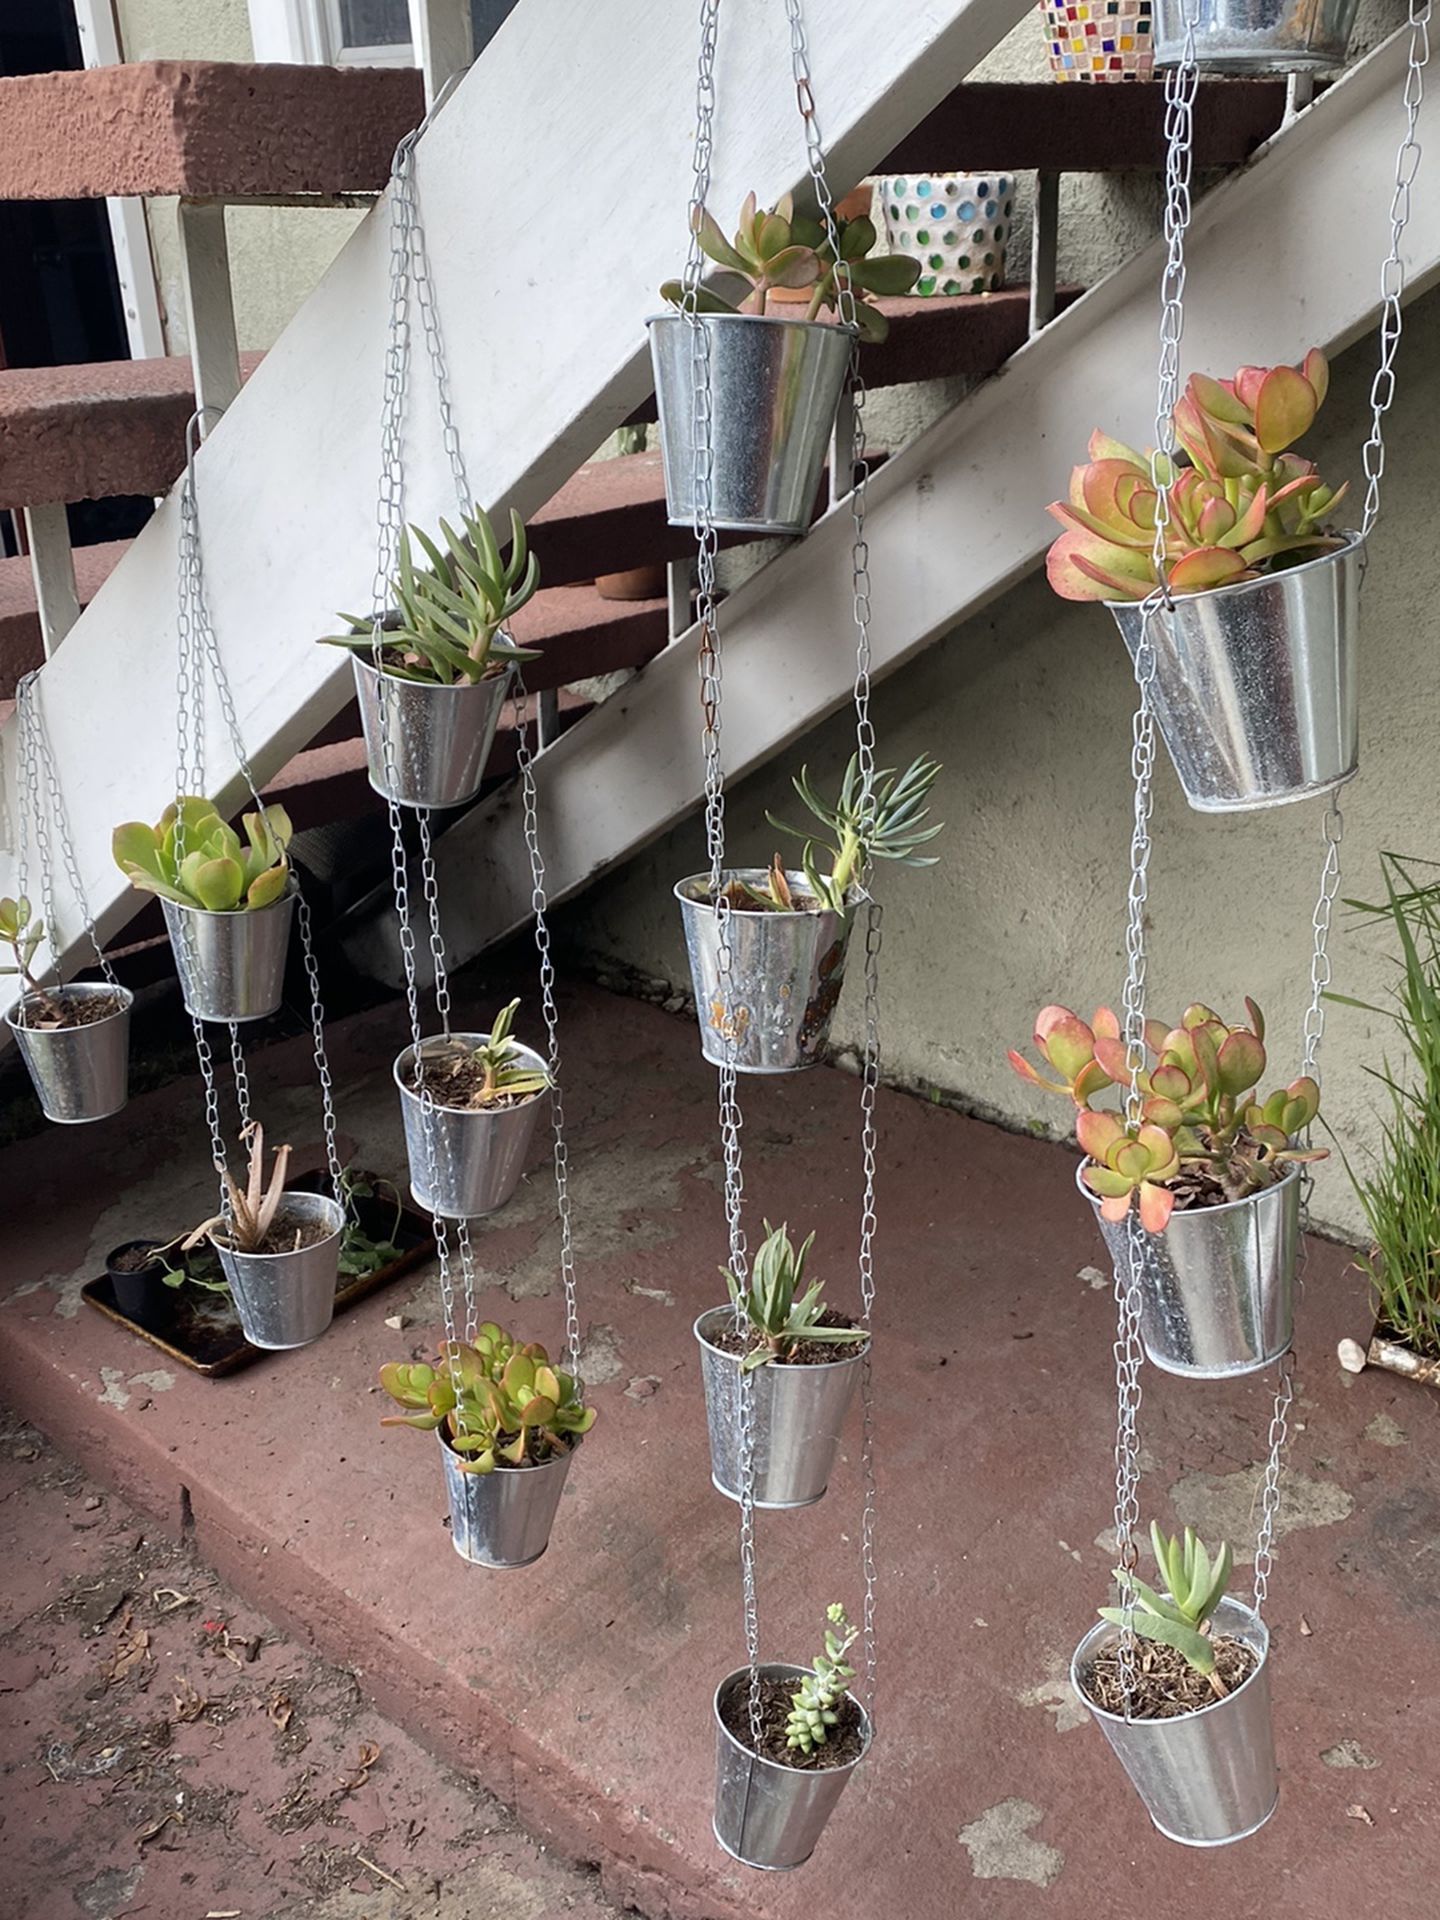 14 x Hanging Tin Pots With Different Succulents